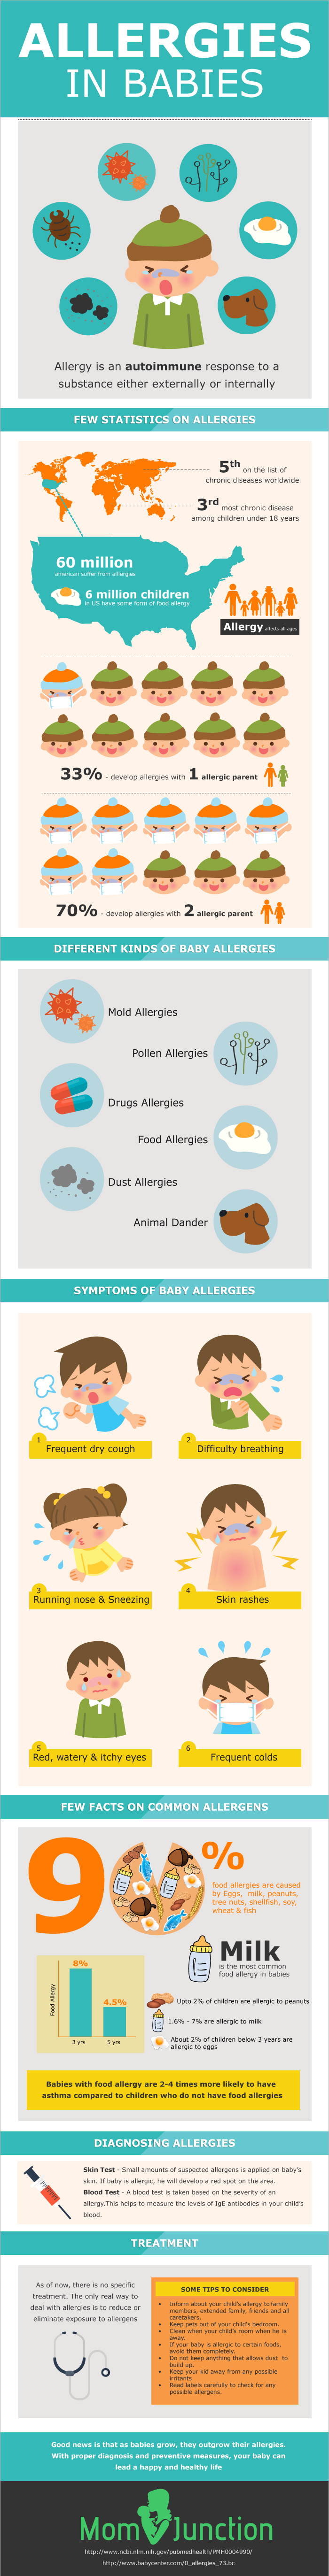 How to Treat Allergies in Babies